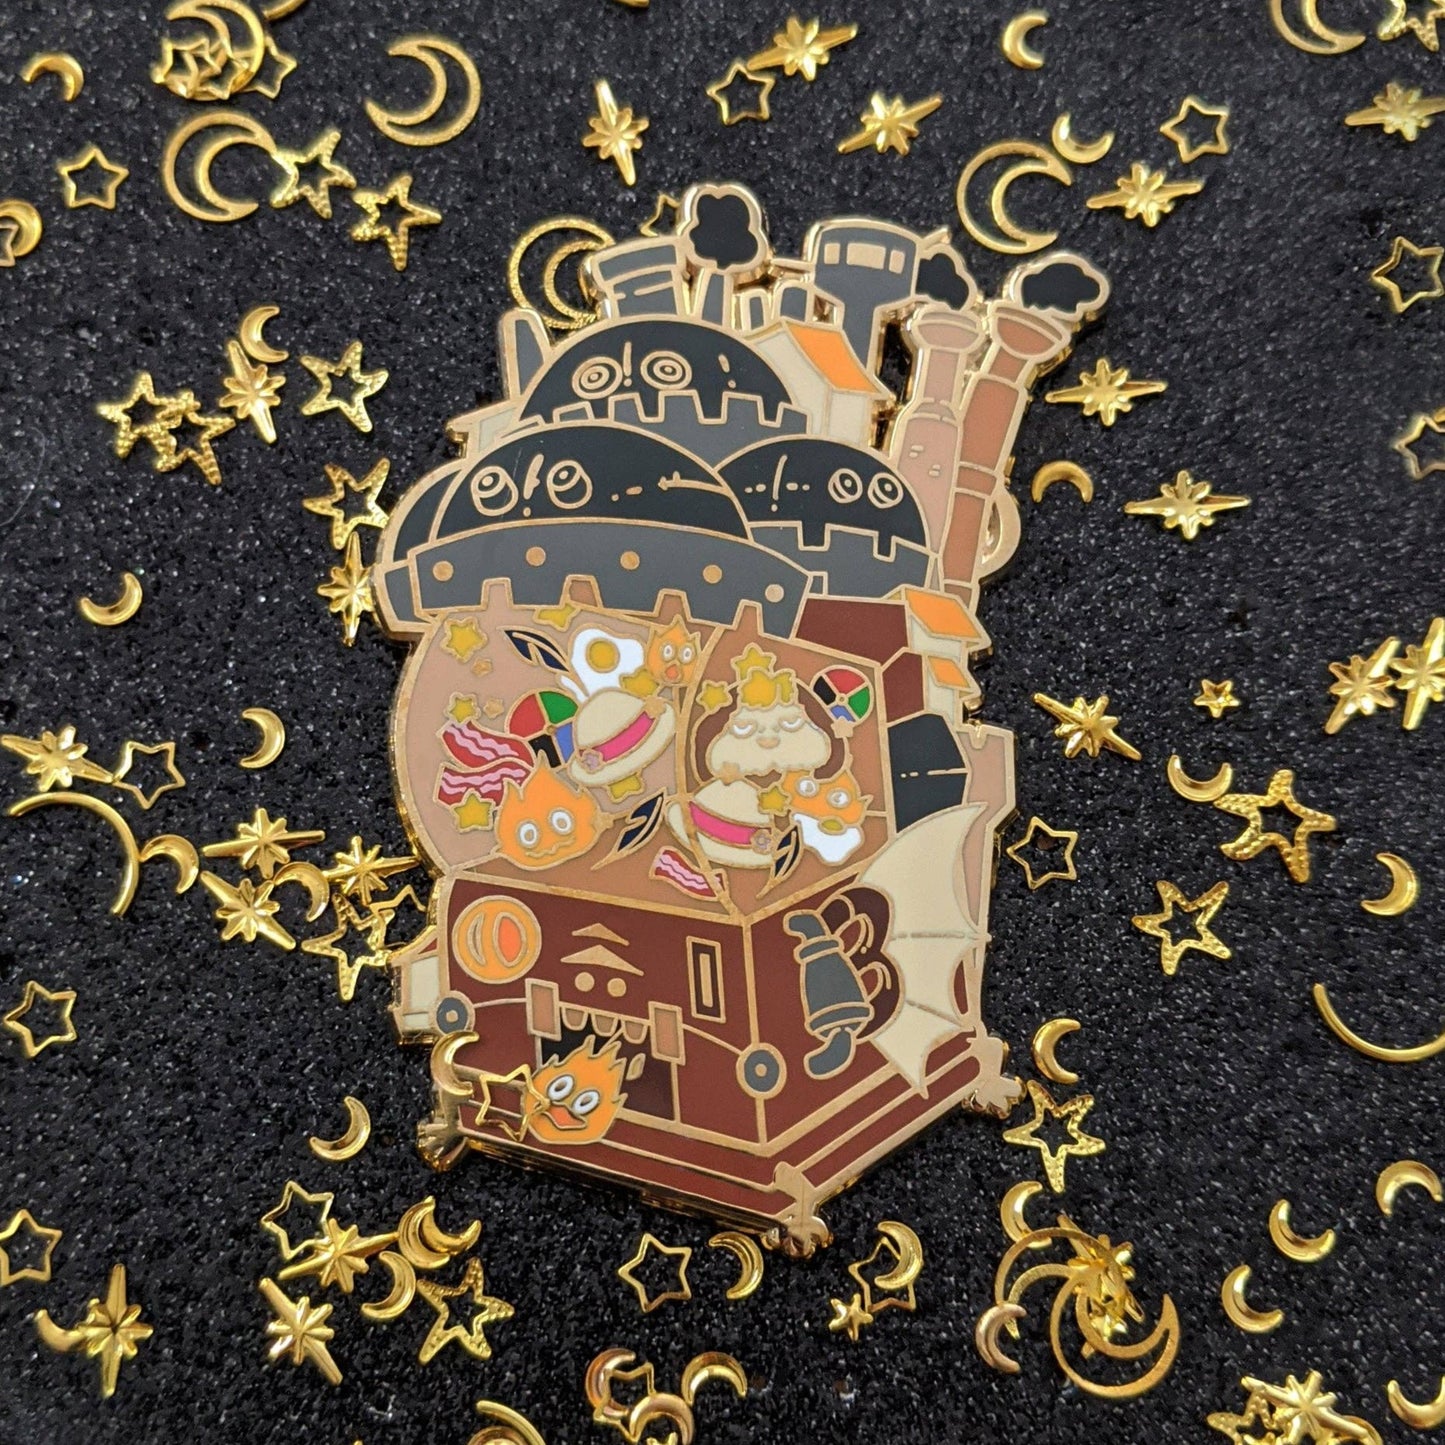 The Moving Castle Pon Enamel Pin by Sugar Cubed Studios